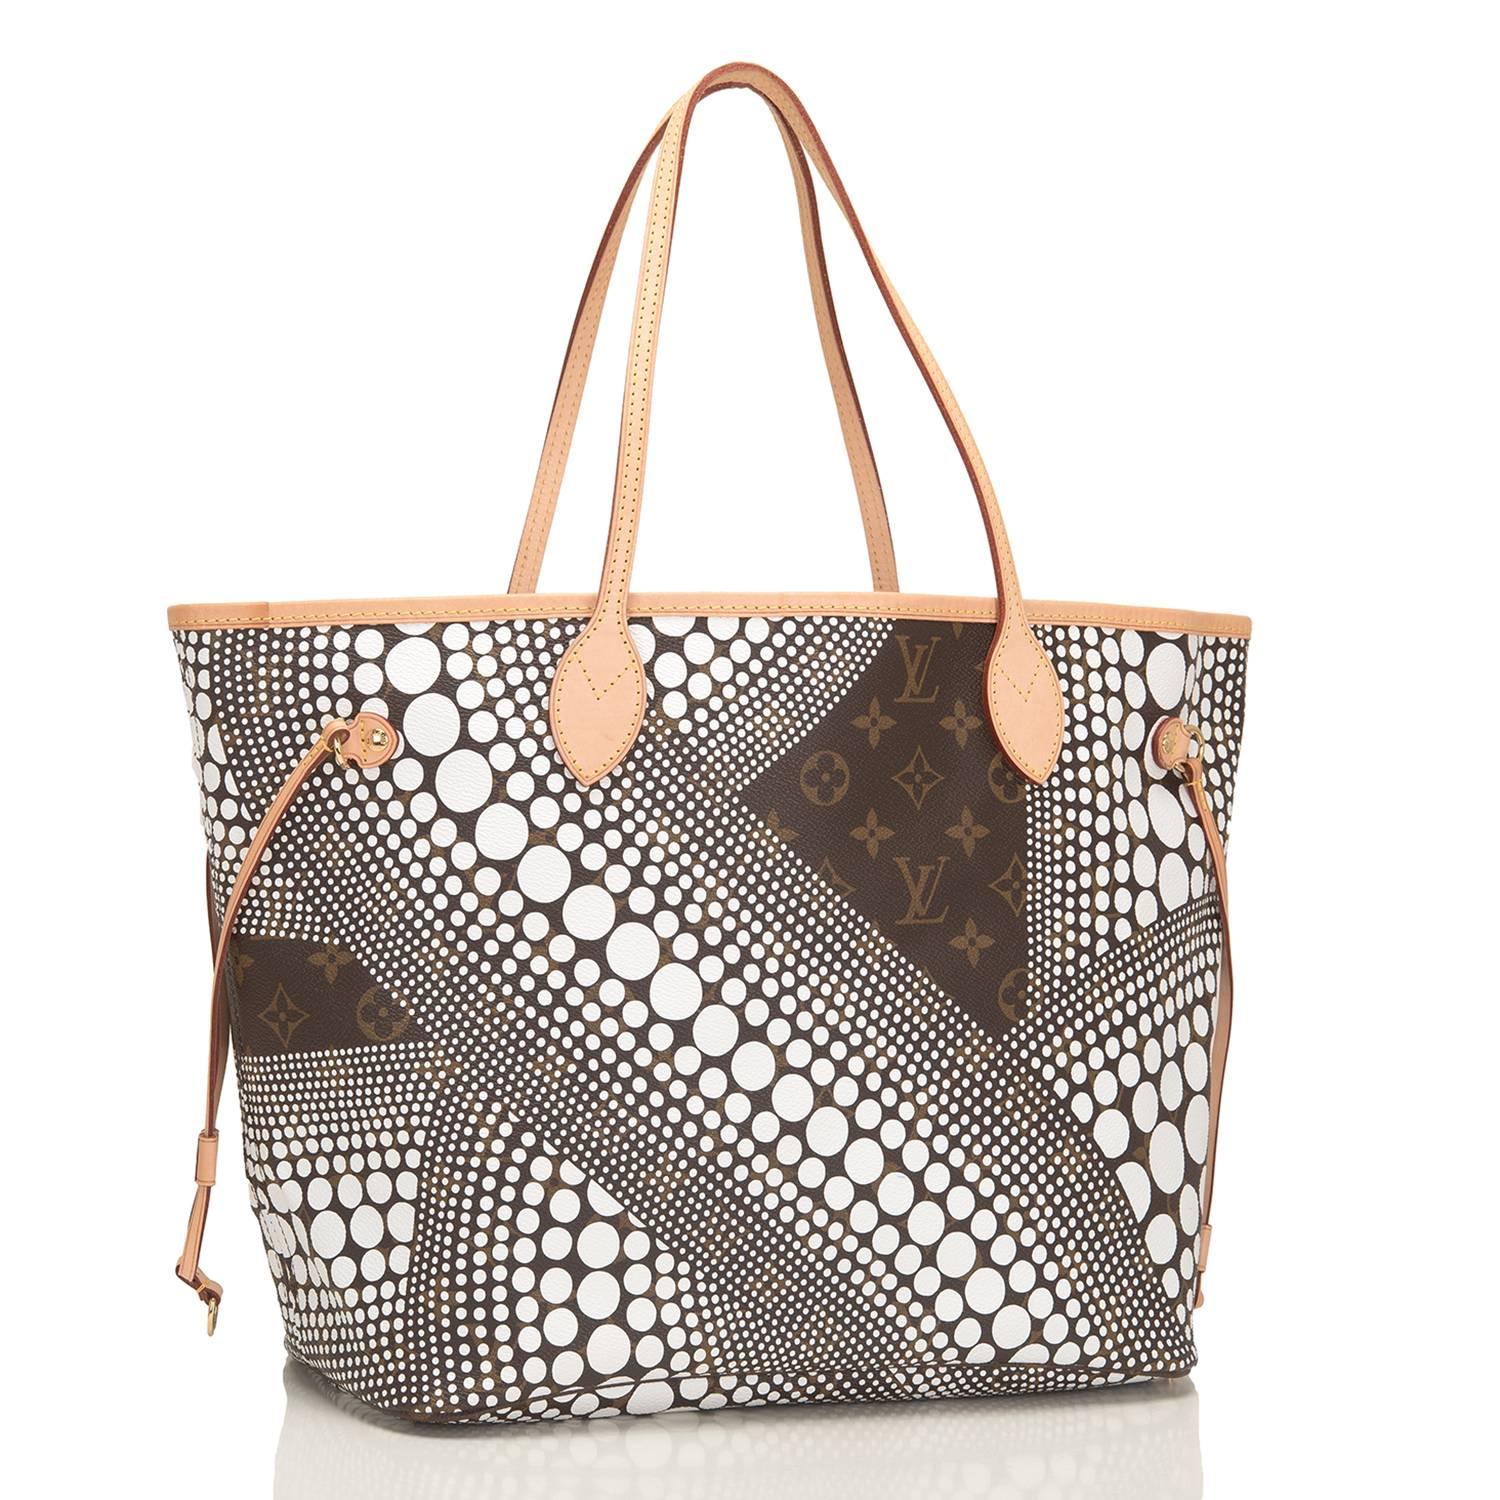 Louis Vuitton White Monogram Waves Neverfull MM tote designed by Yayoi Kusama of coated canvas.

This limited edition Neverfull has polished brass hardware, yellow contrast stitching, a removable luggage tag, a hidden top hook closure, double flat